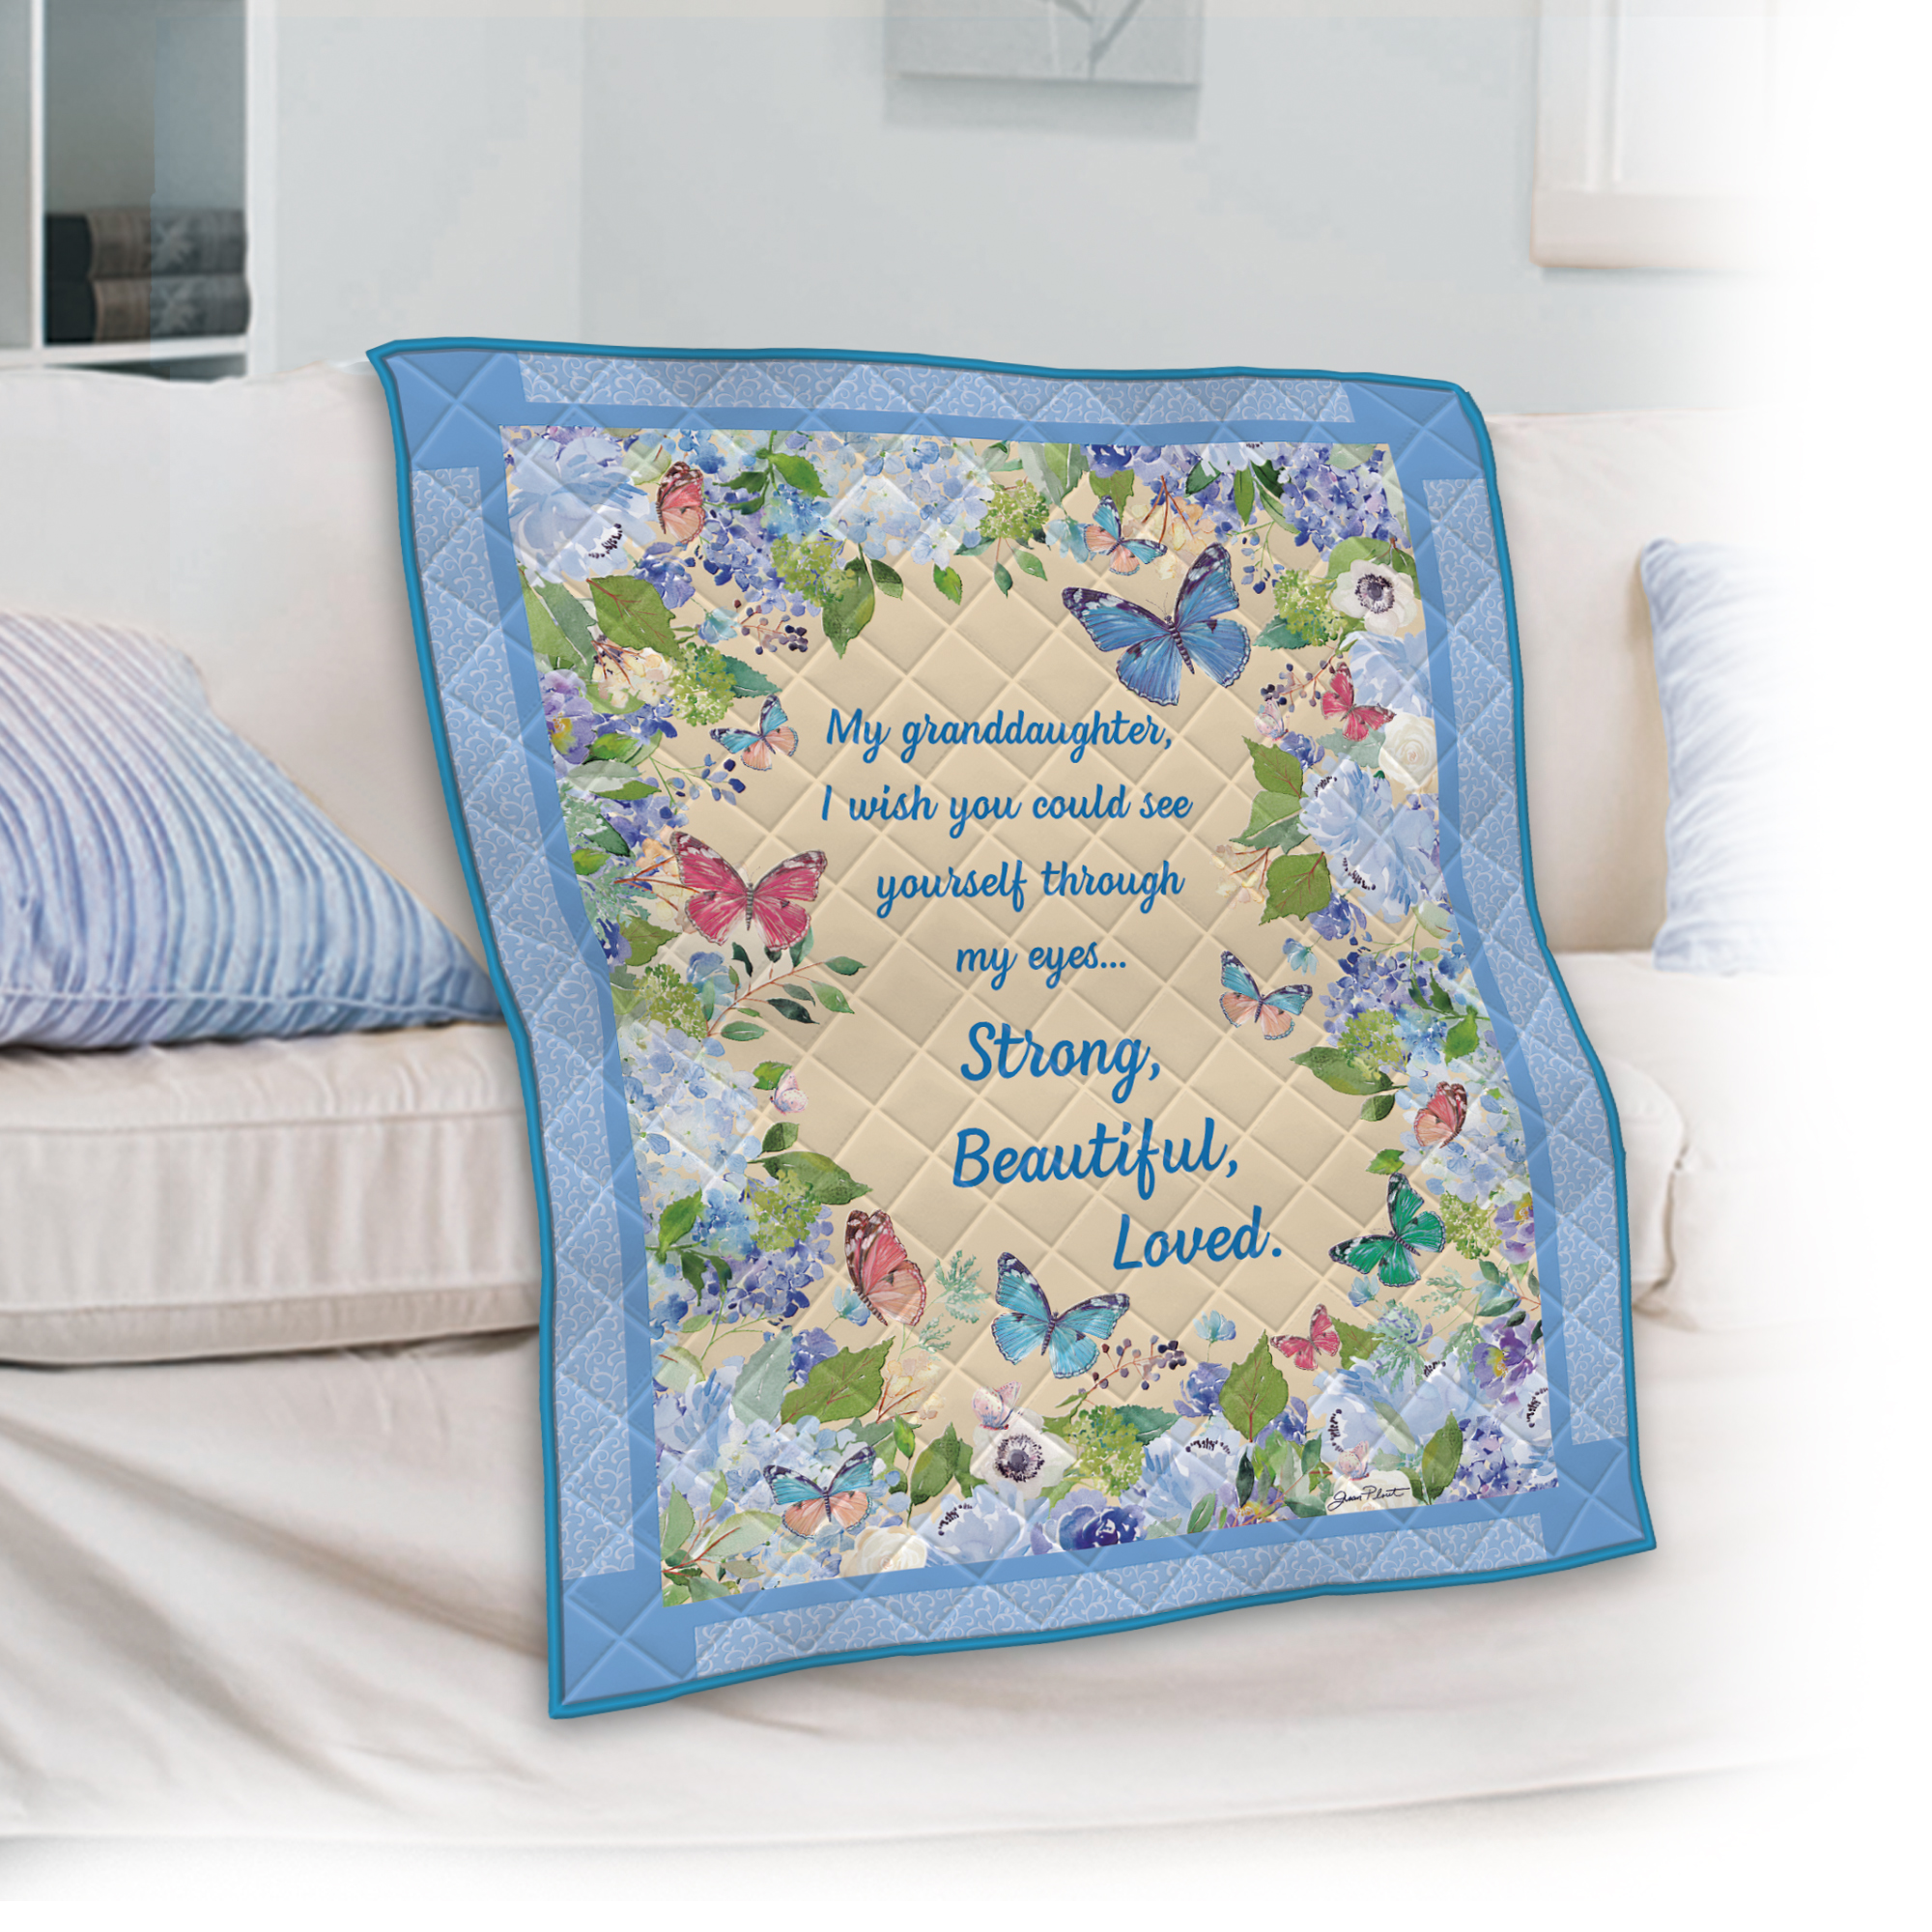 Strong Beautiful Loved Granddaughter Butterfly Quilt 10635 0010 a main